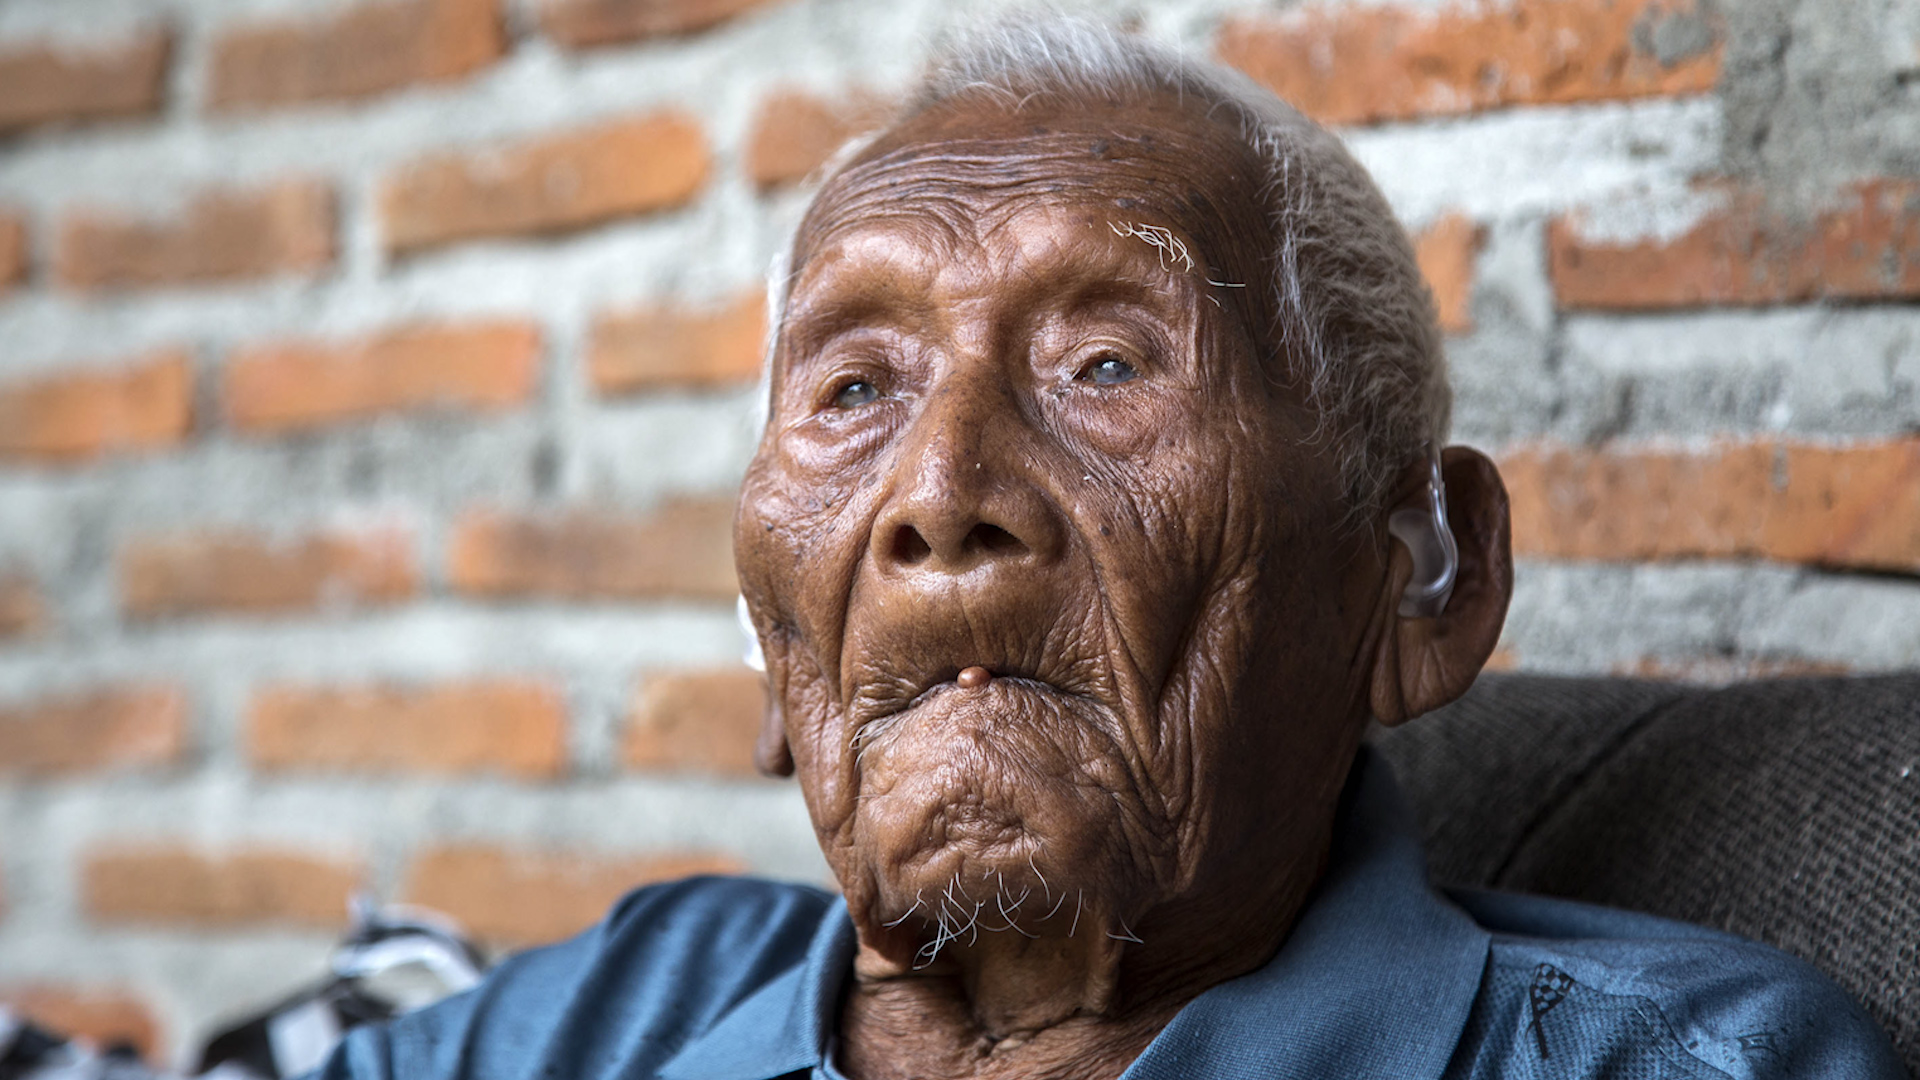 Man who claimed to be world’s oldest person dies at ‘age 146